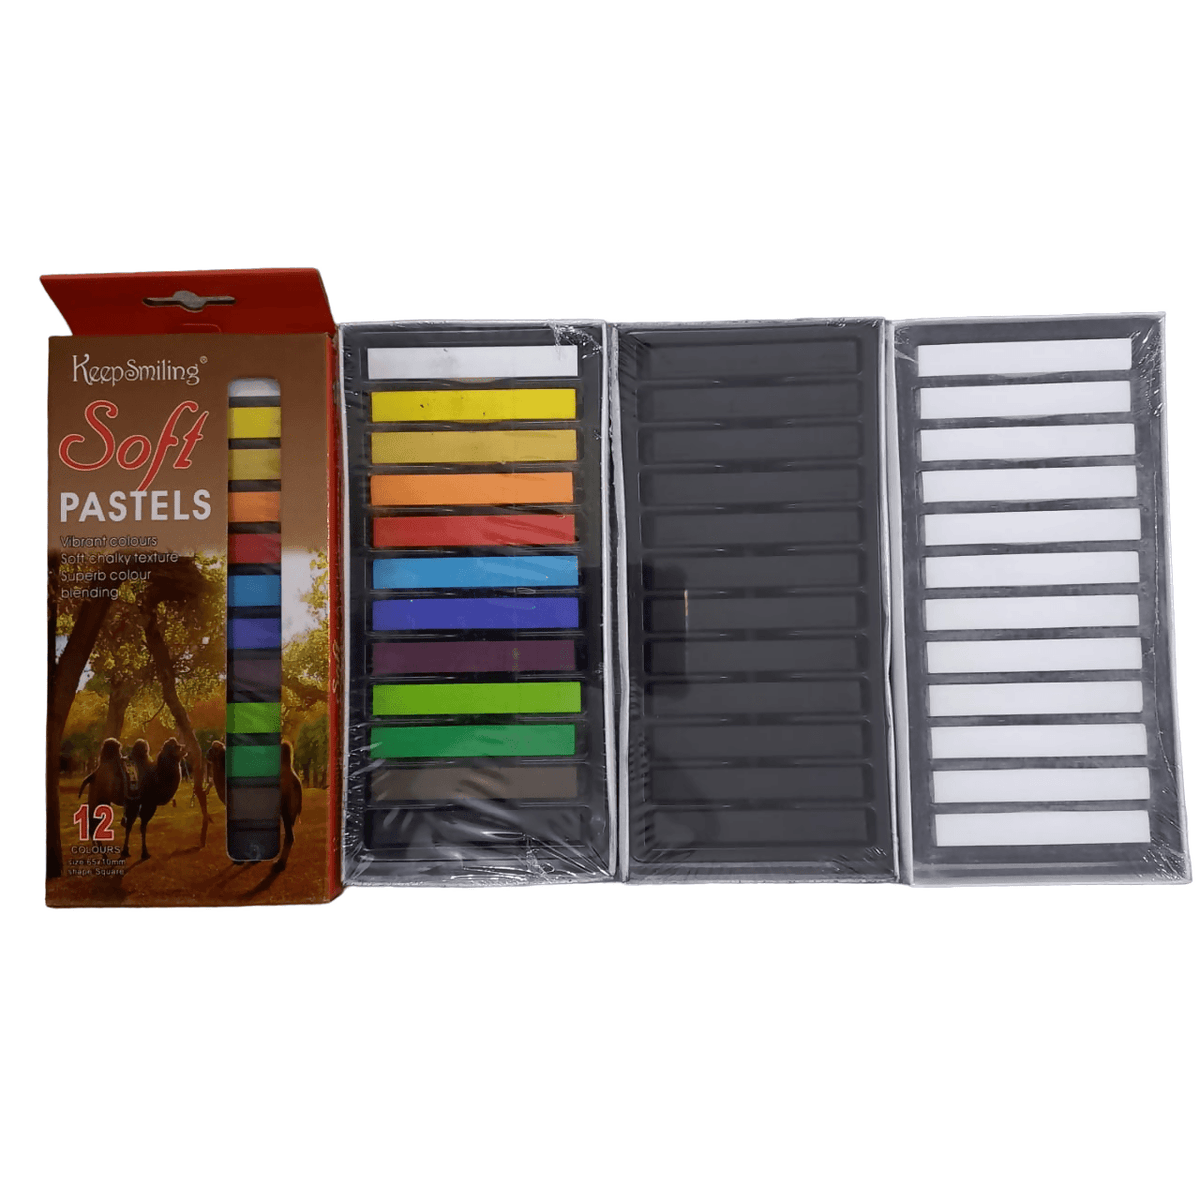 Keep Smiling Soft Pastels - Pack of 12 - ValueBox